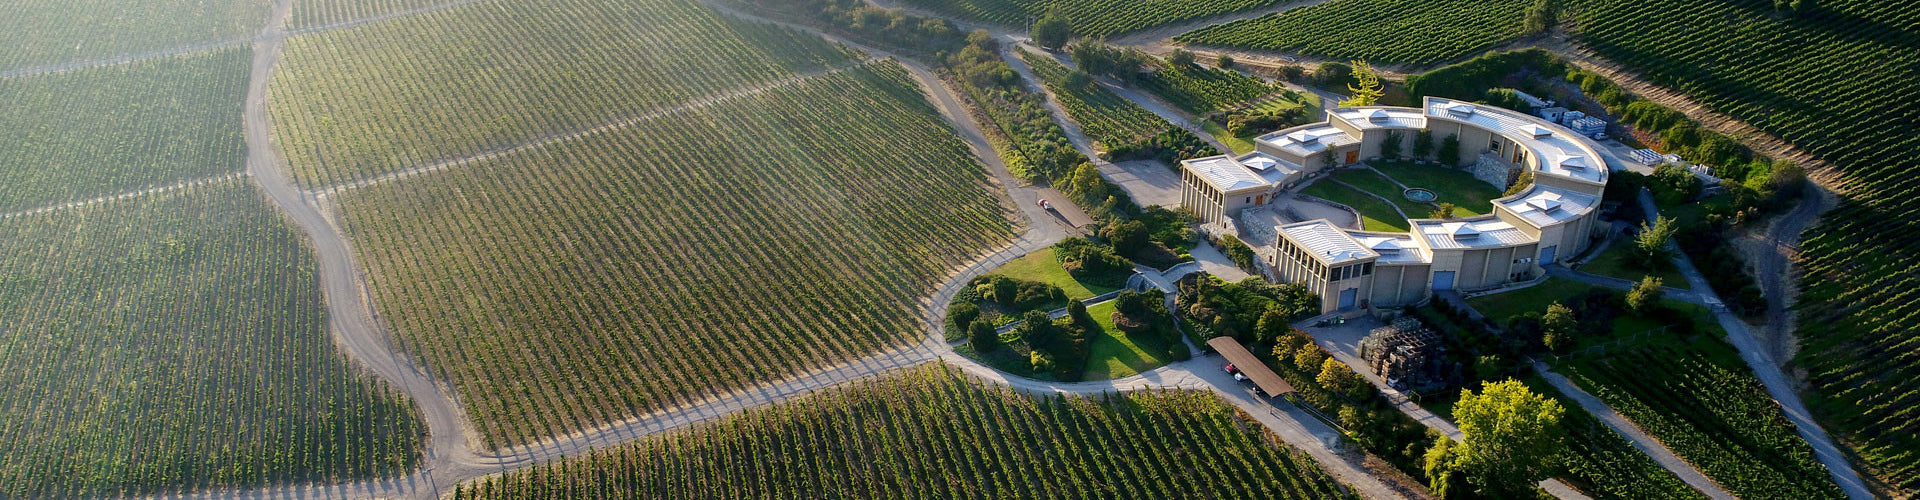 Ariel view of the Haras de Pirque vineyards and Horse-Shoe shaped Winery